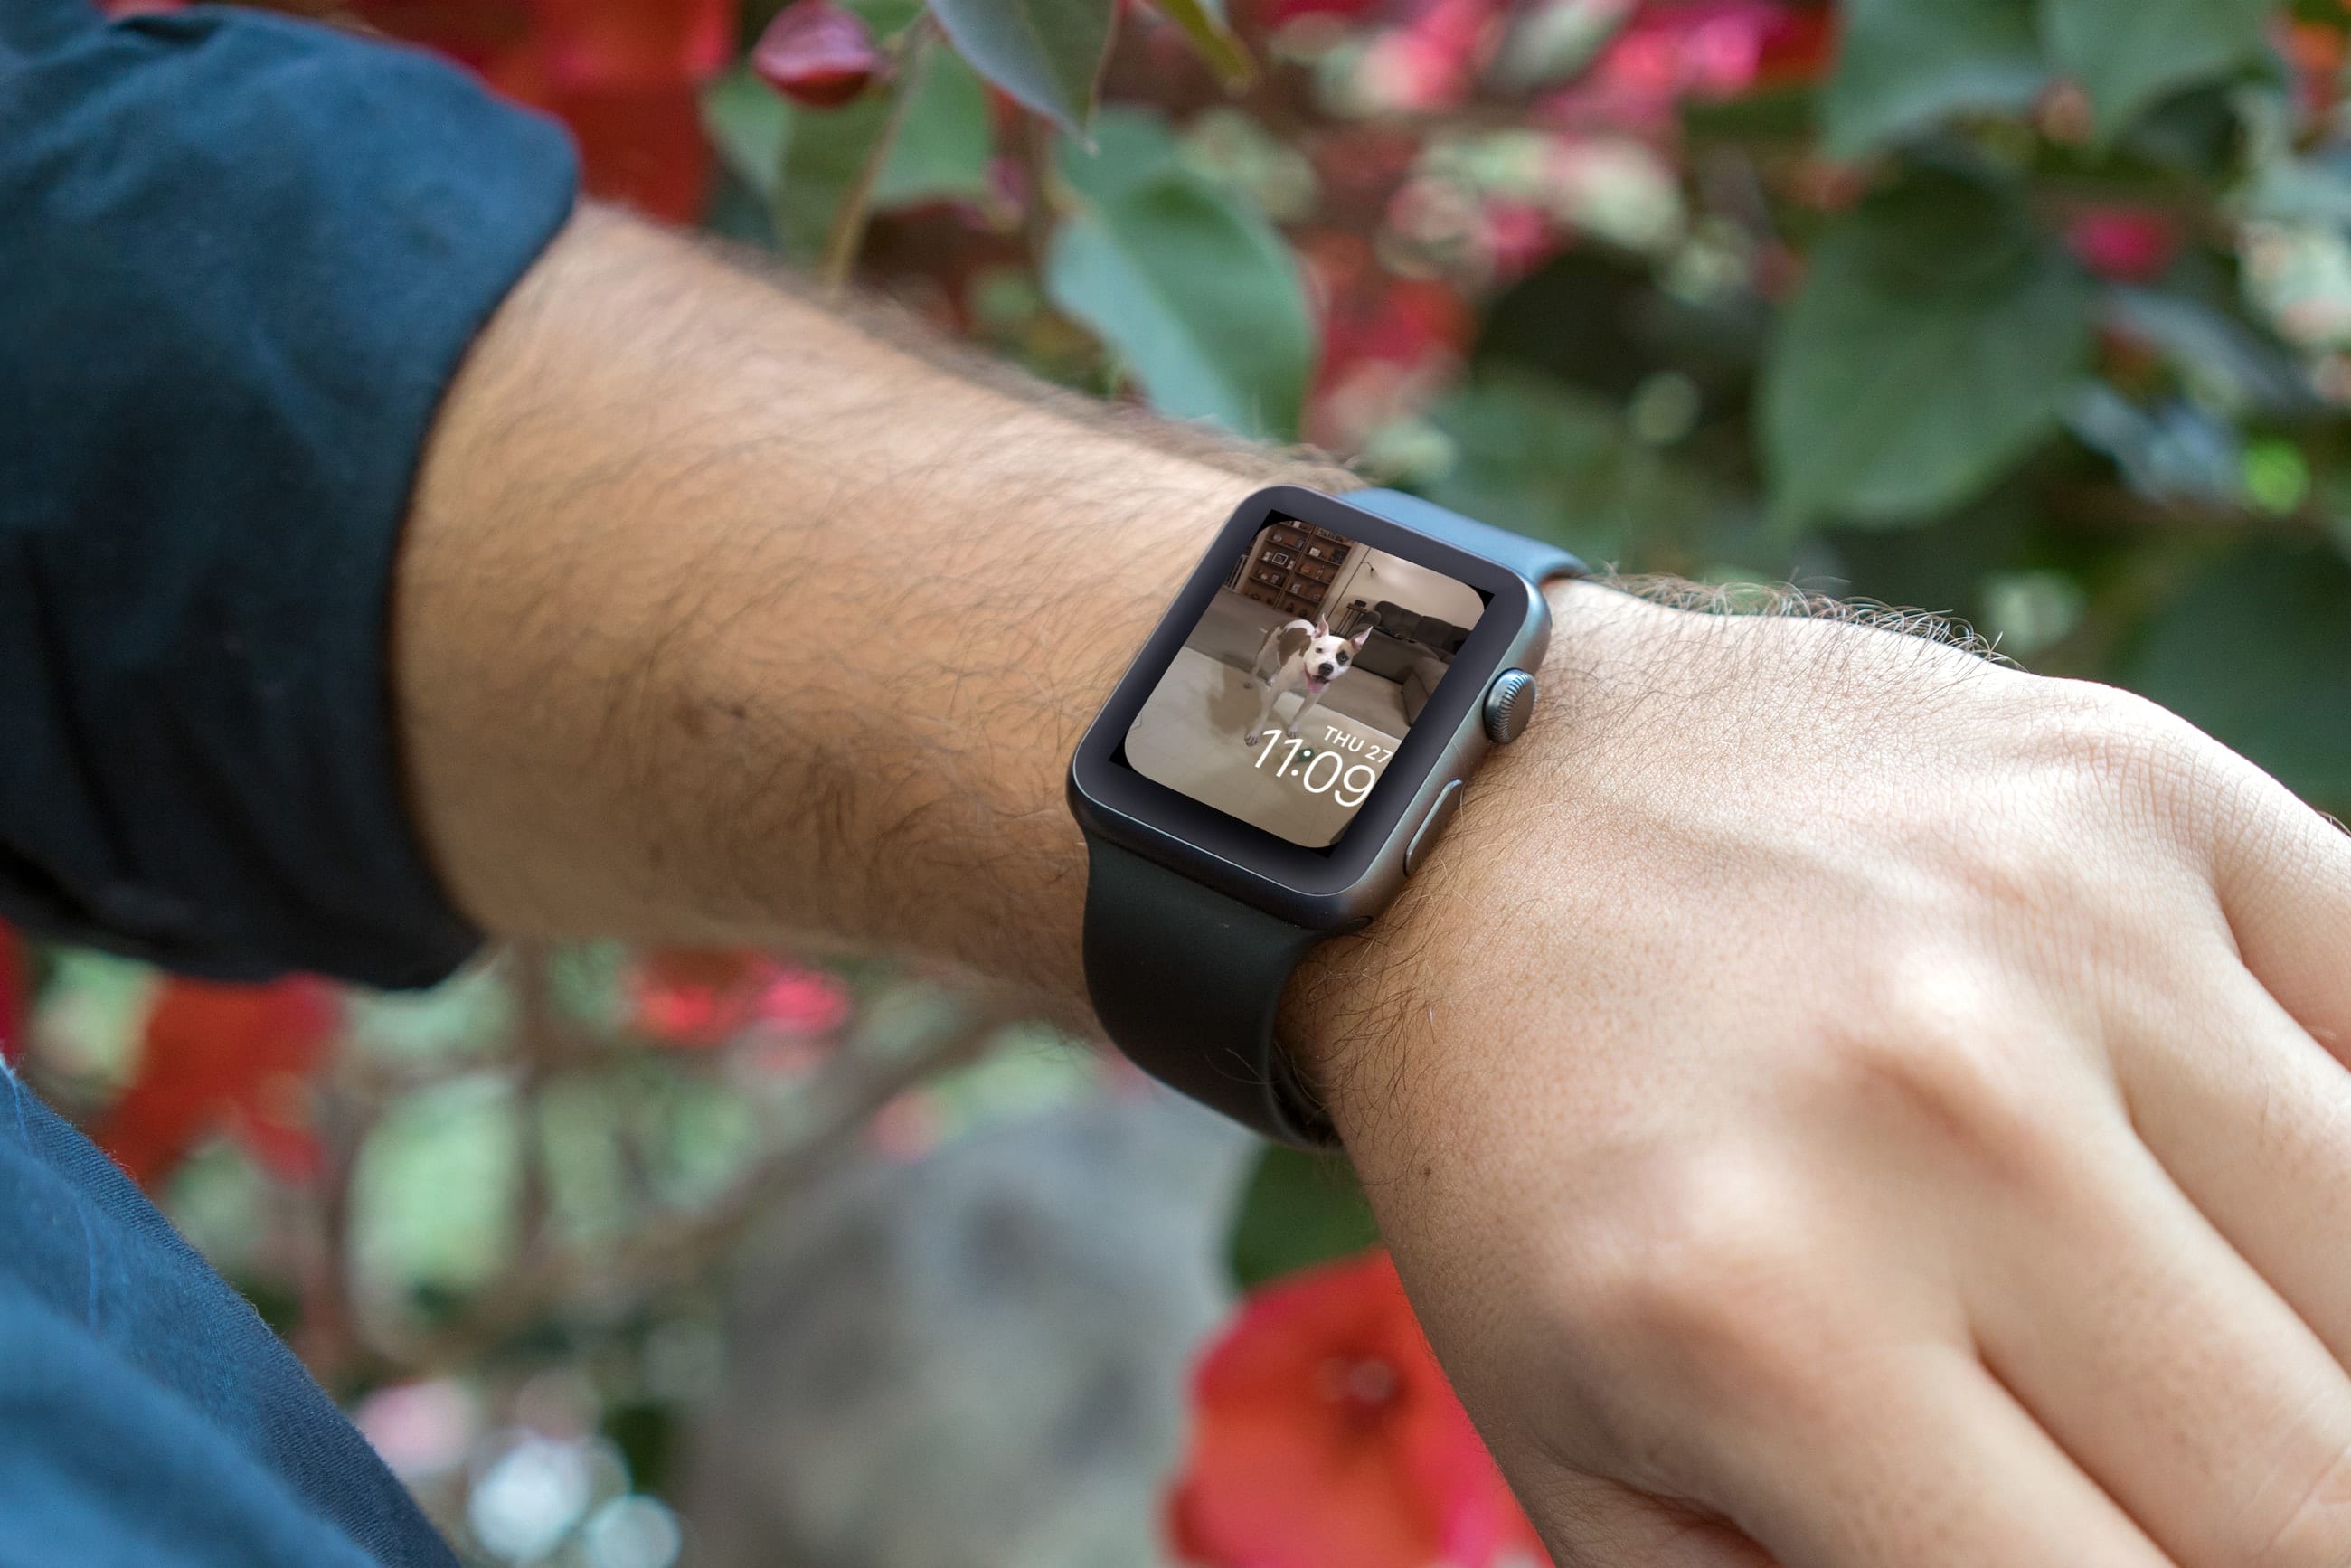 How to use your own photo as your Apple Watch face